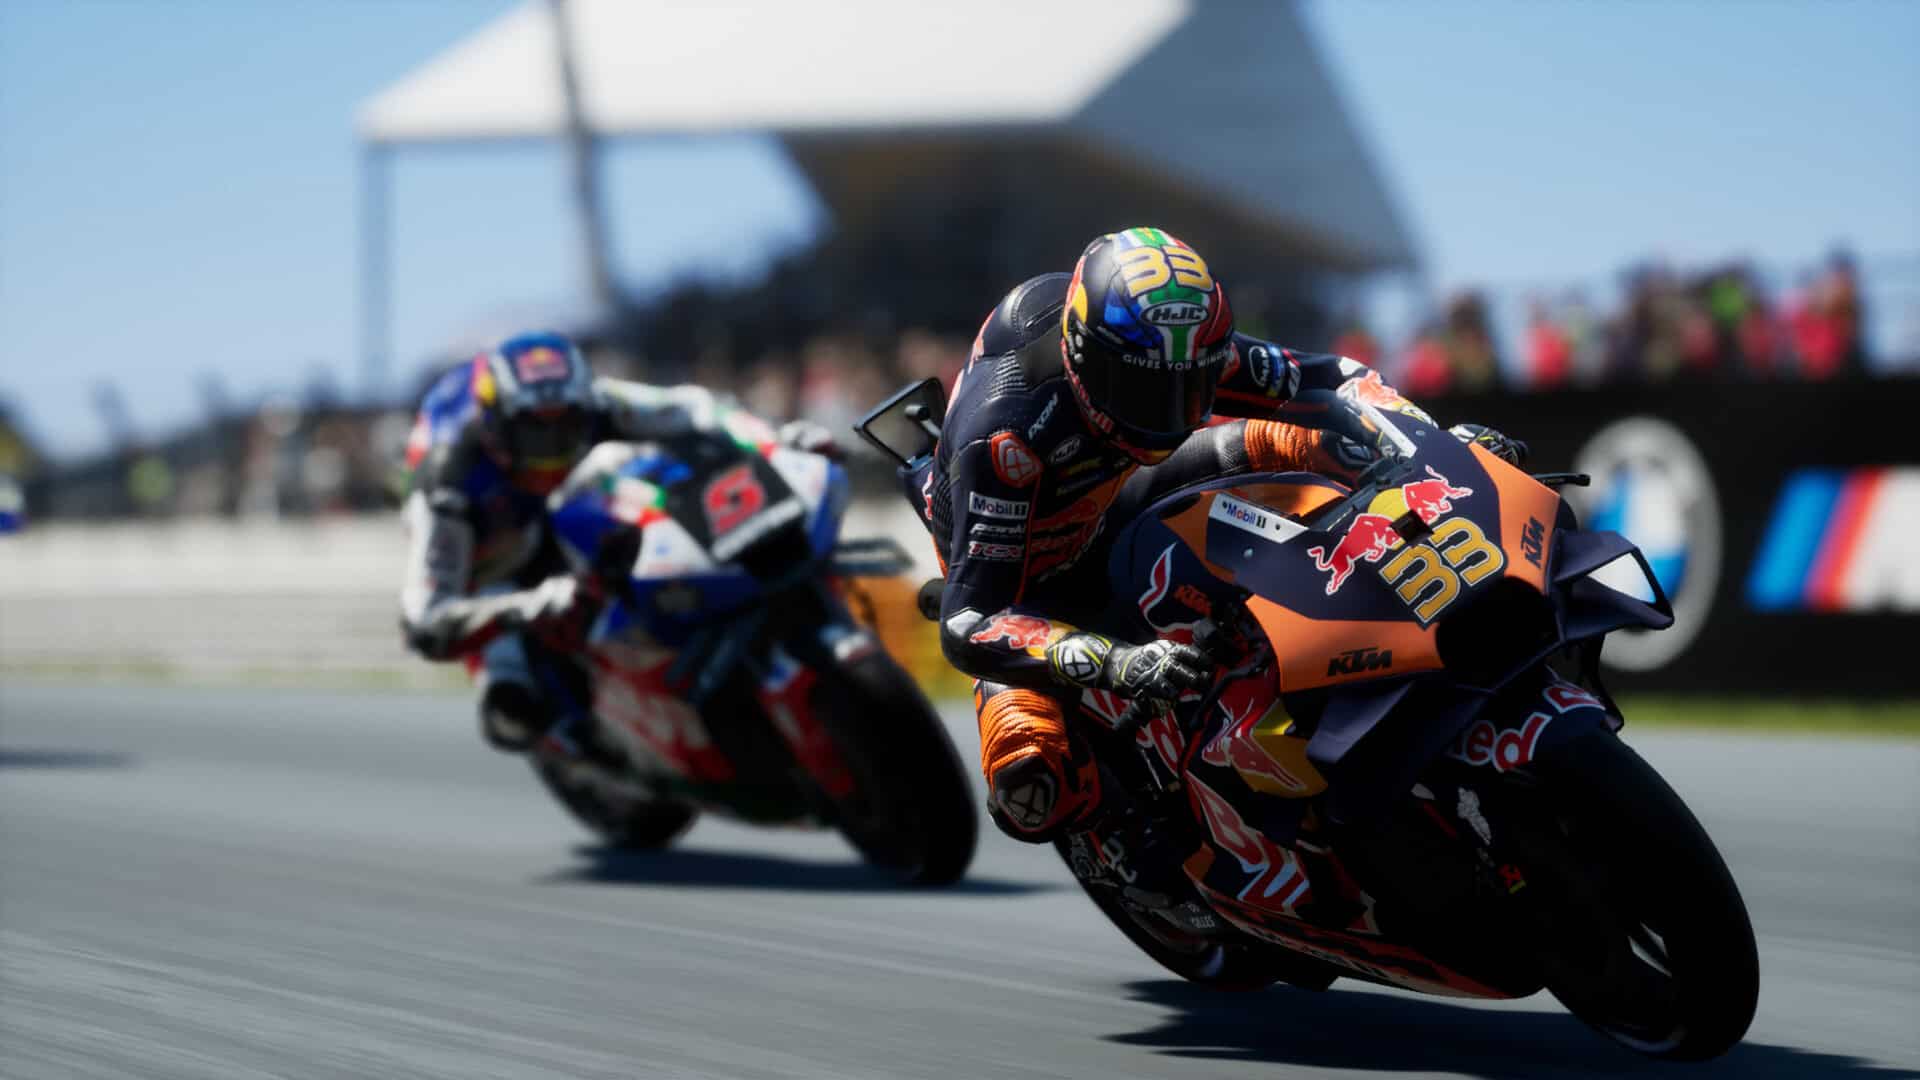 MotoGP 24 release date - Two MotoGP racers lean into a sharp turn on the track